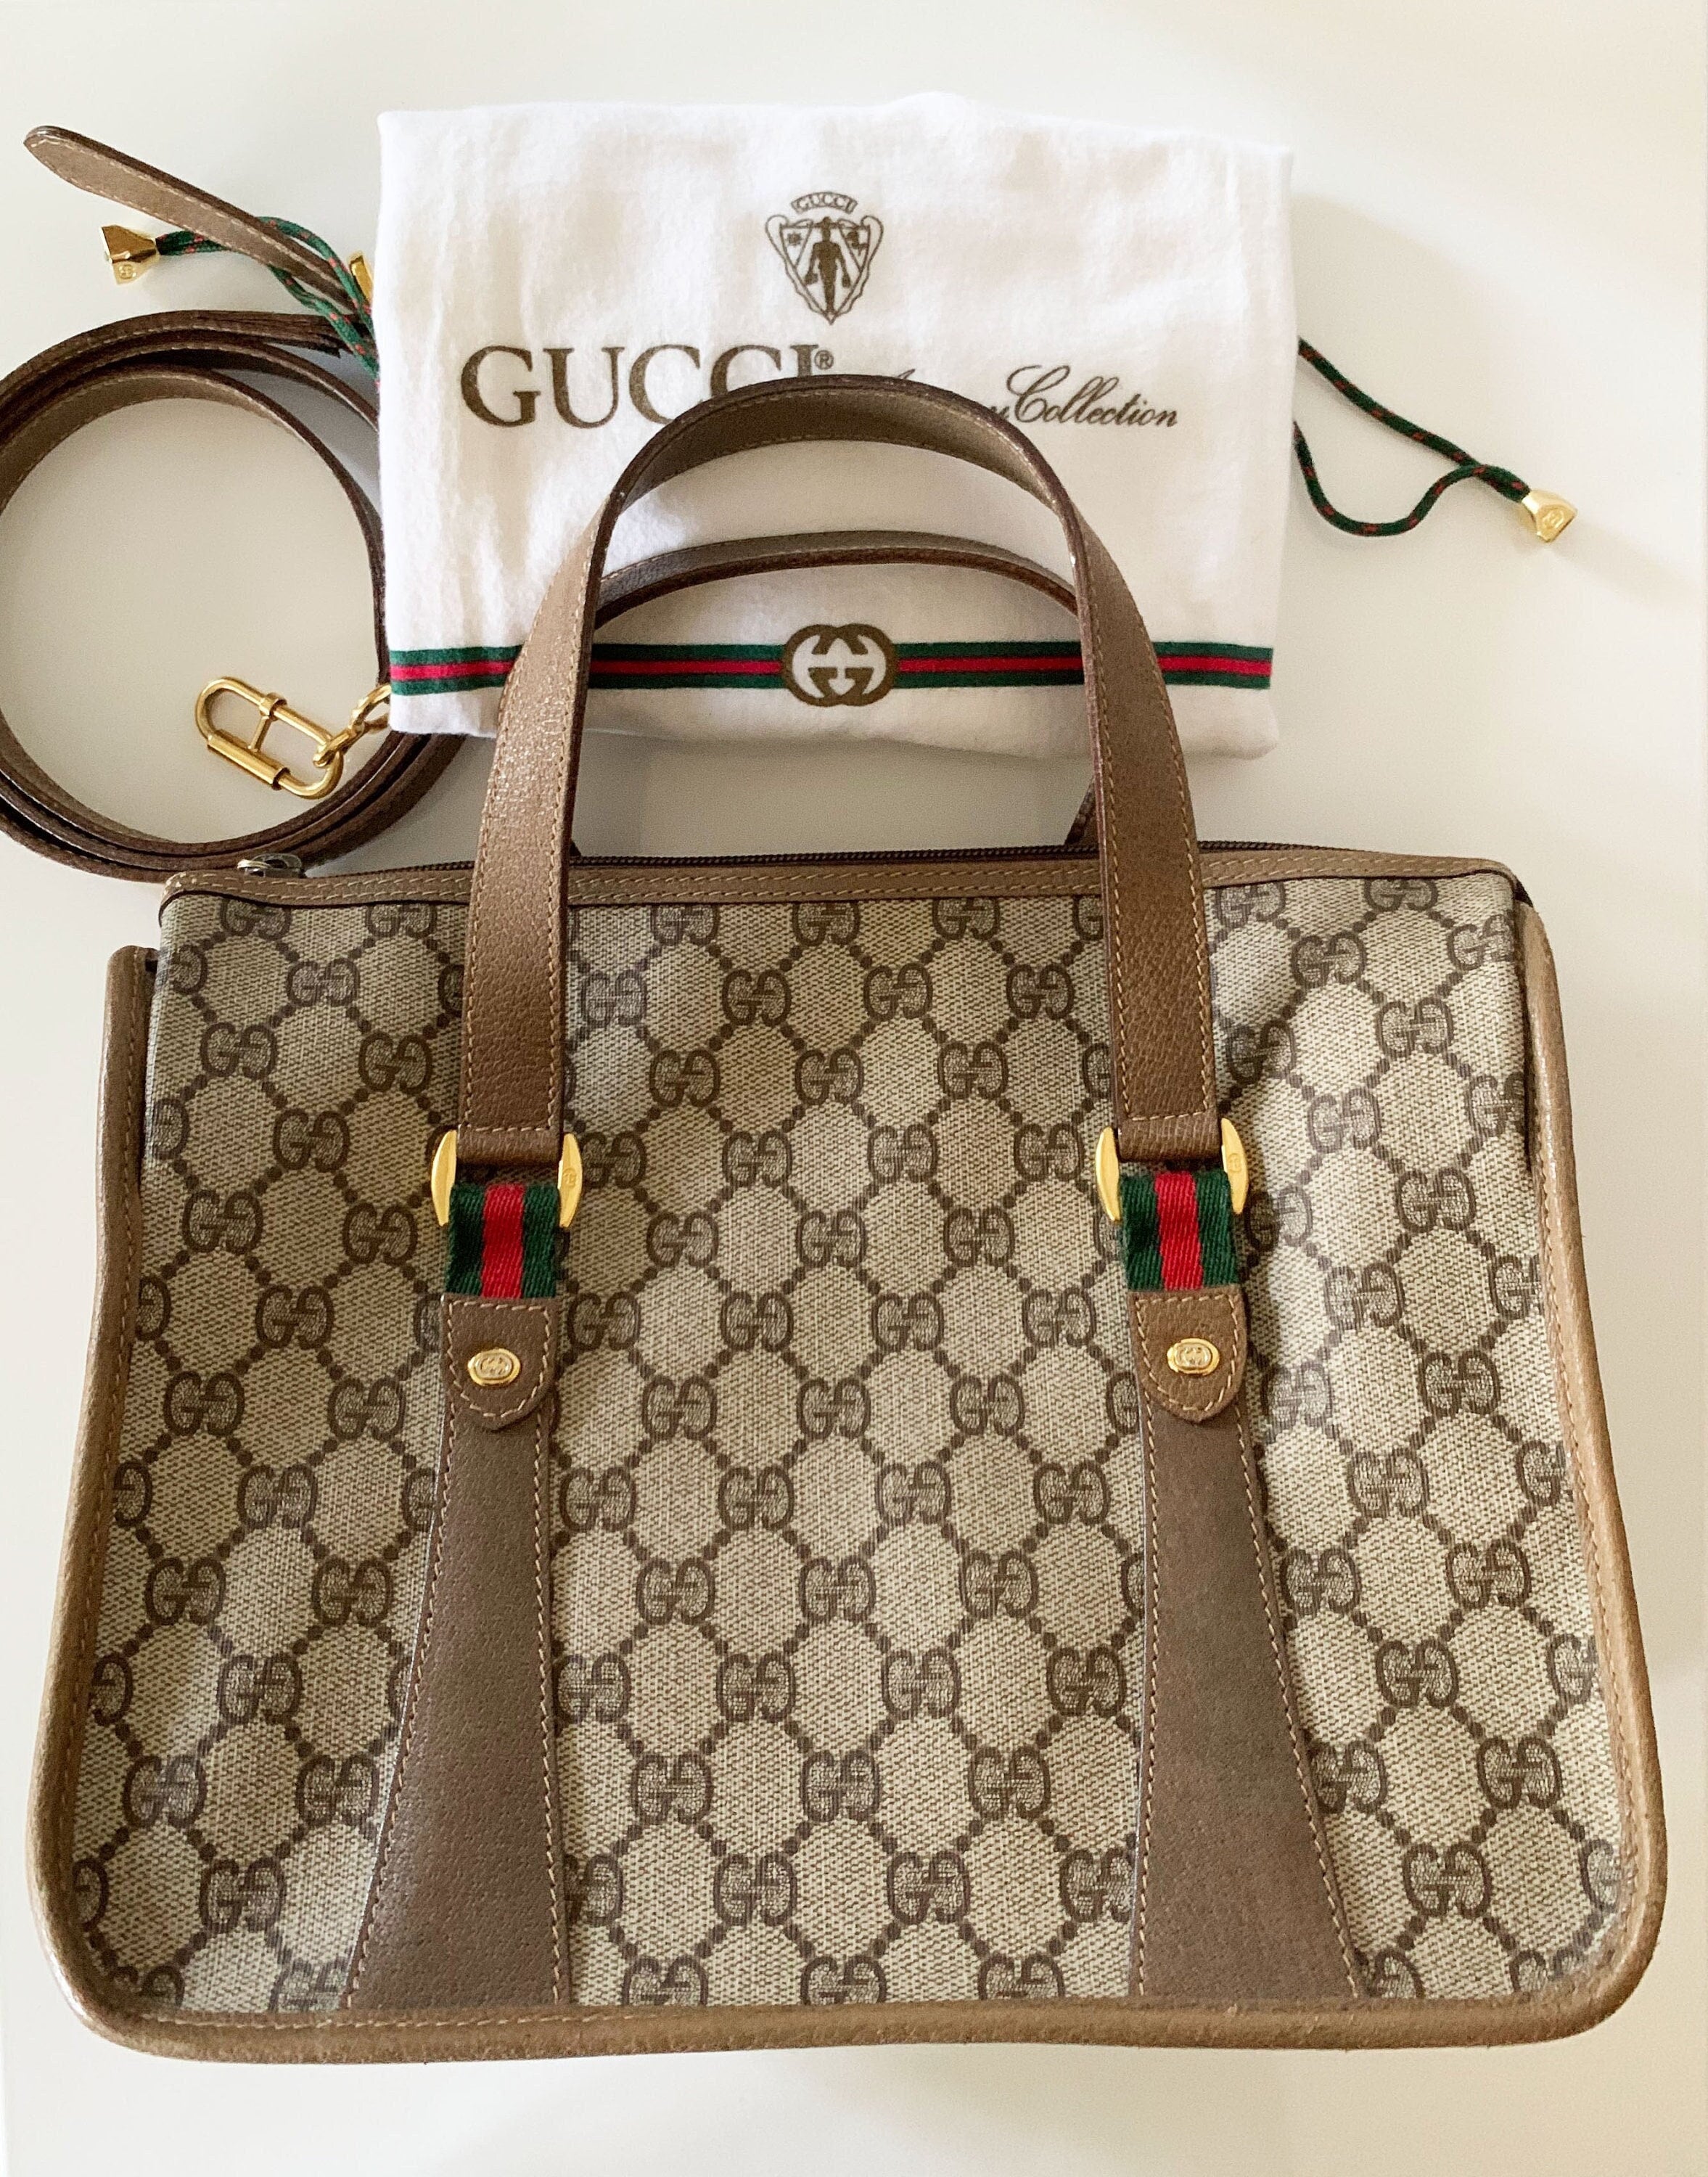 Authentic Gucci - Etsy